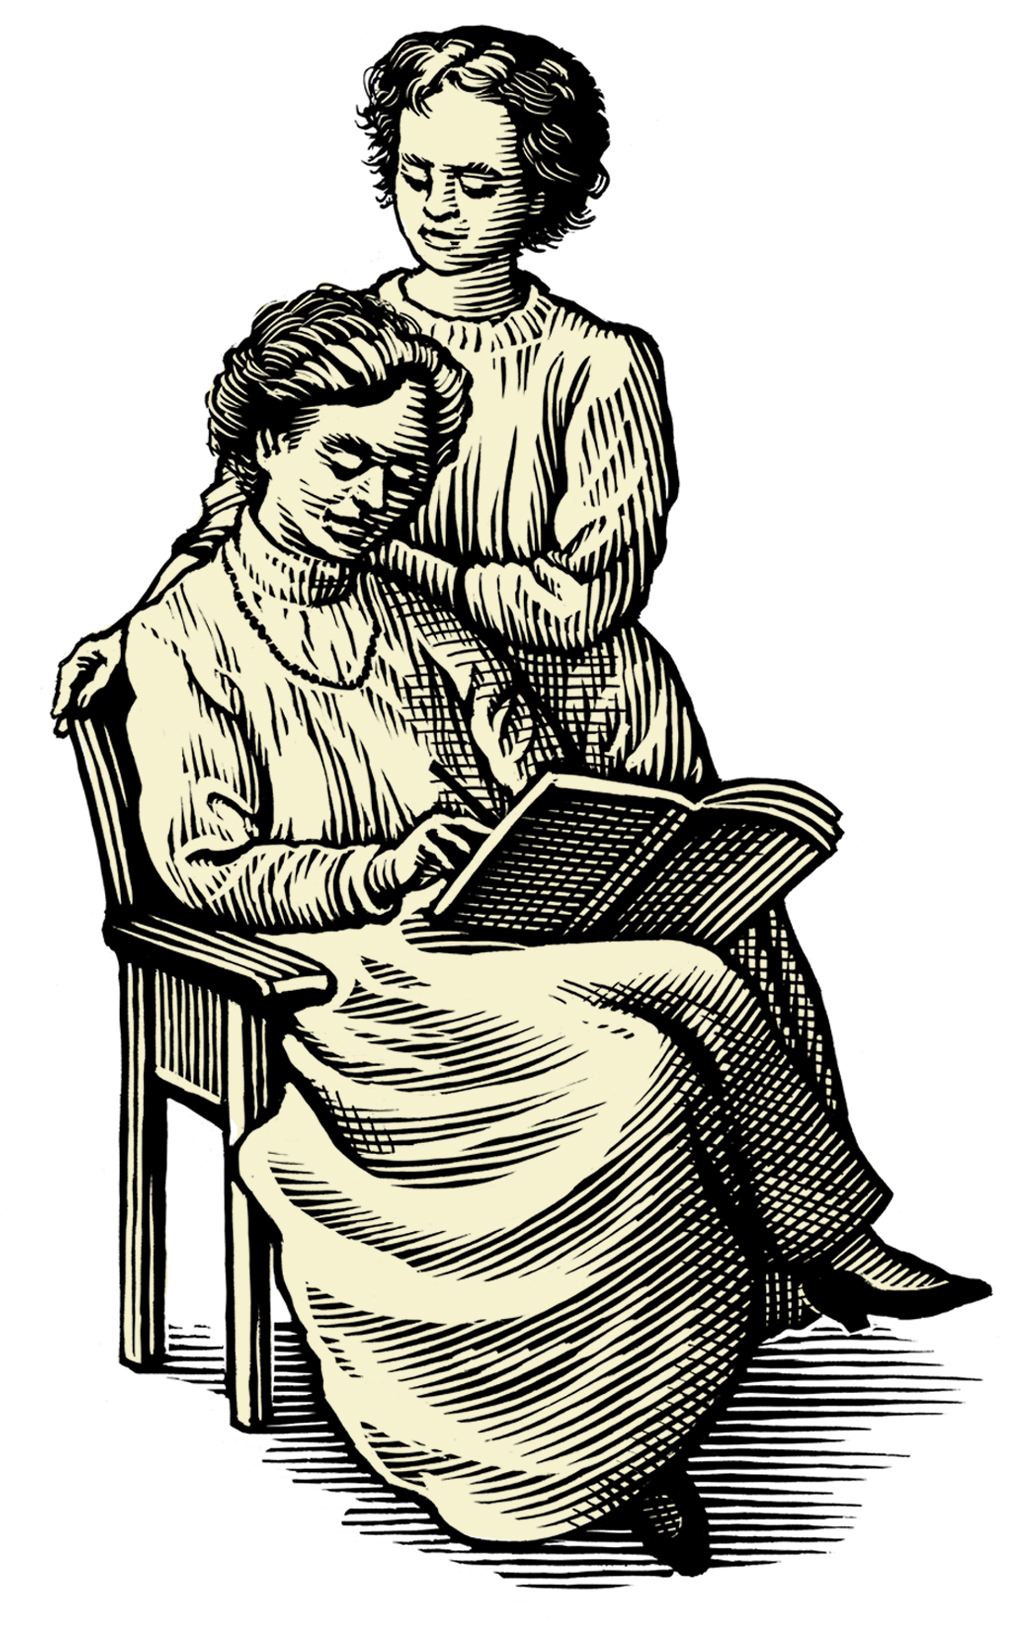 Black-and-white illustration of two women, Katherine Bradley and Edith Cooper. One woman sits in a chair, reading from a book. The other stands at her side, one hand resting on her lover's shoulder